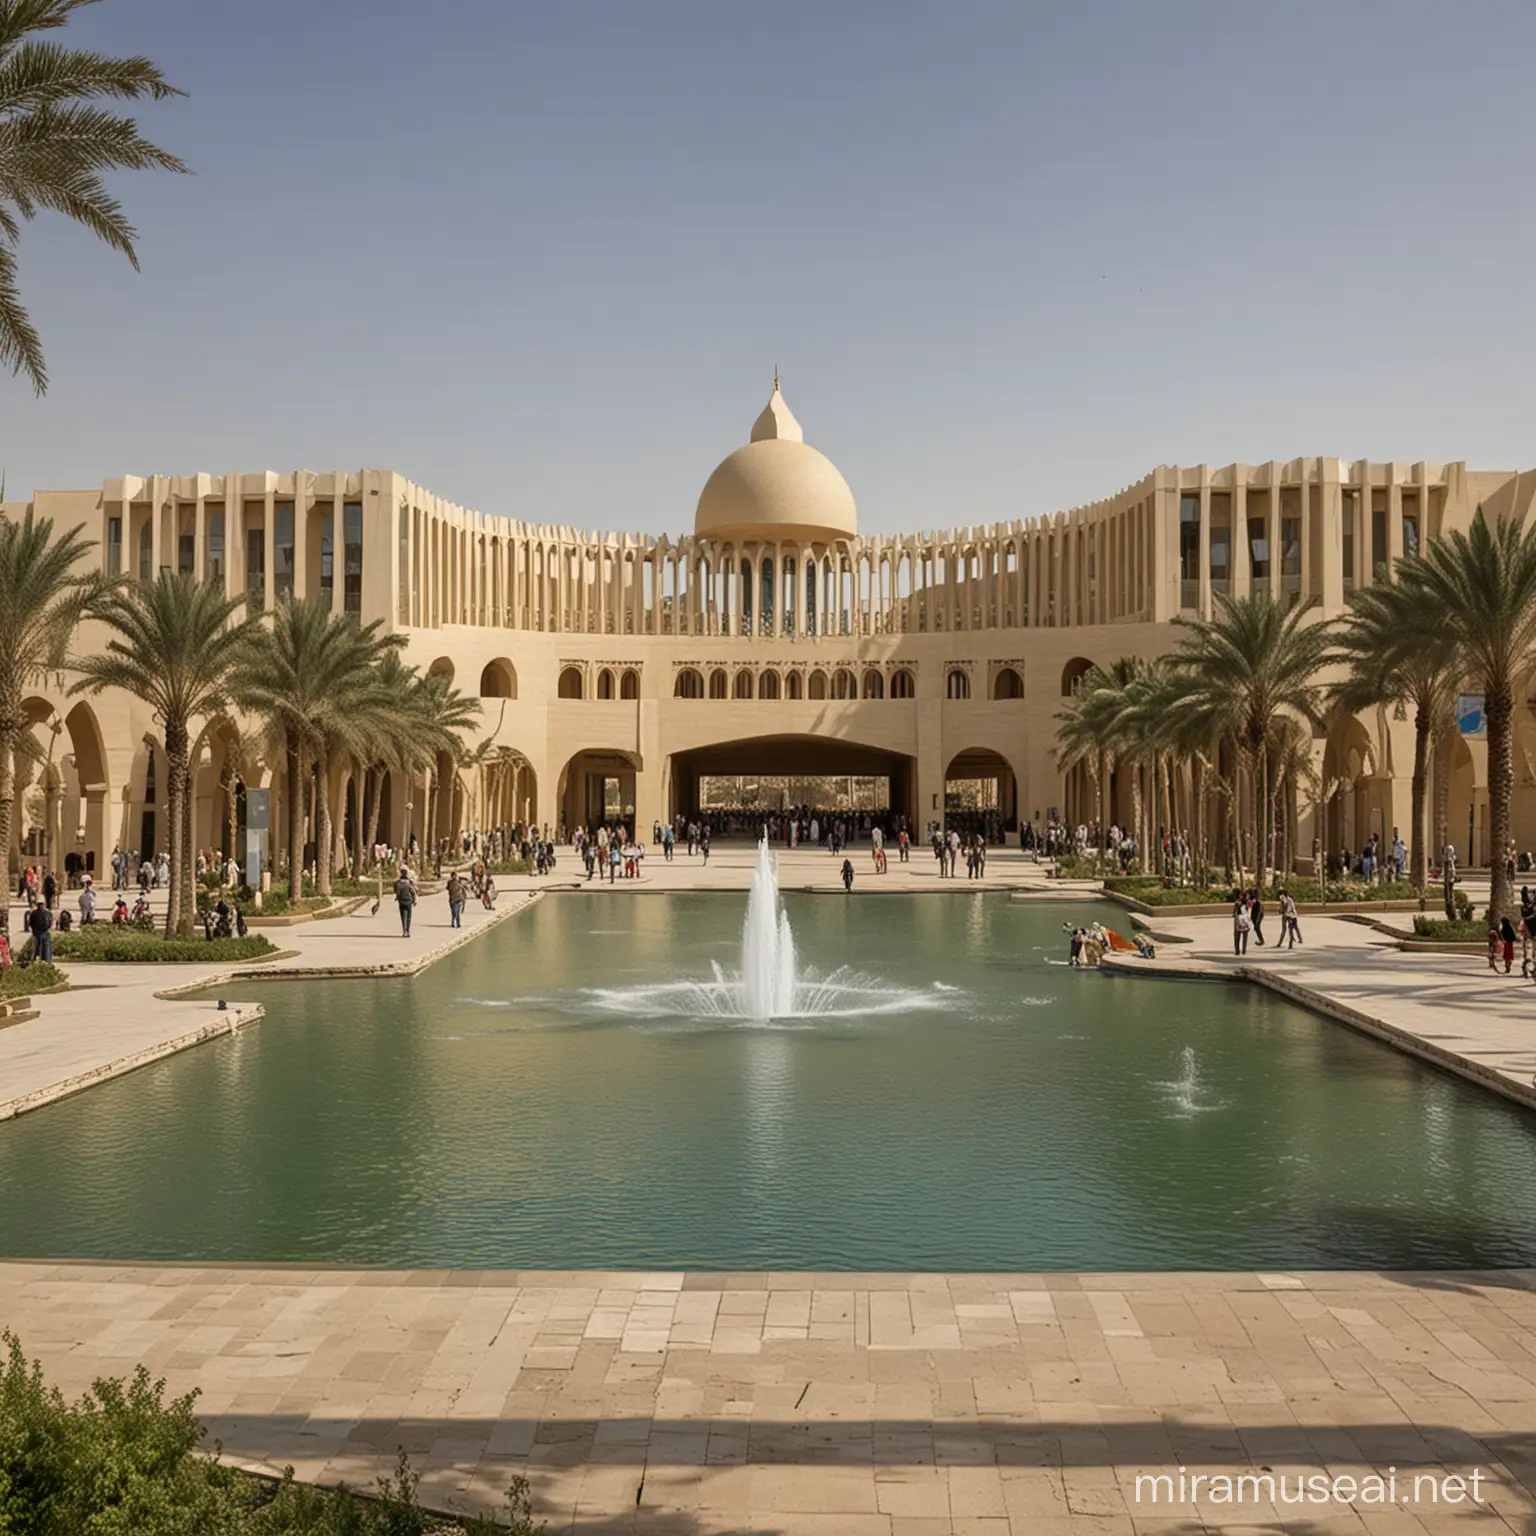 The design of the Iraq Pavilion at the Baghdad International Fair has a modern architectural style that combines heritage and contemporary times. The design includes fountains and terraced gardens.